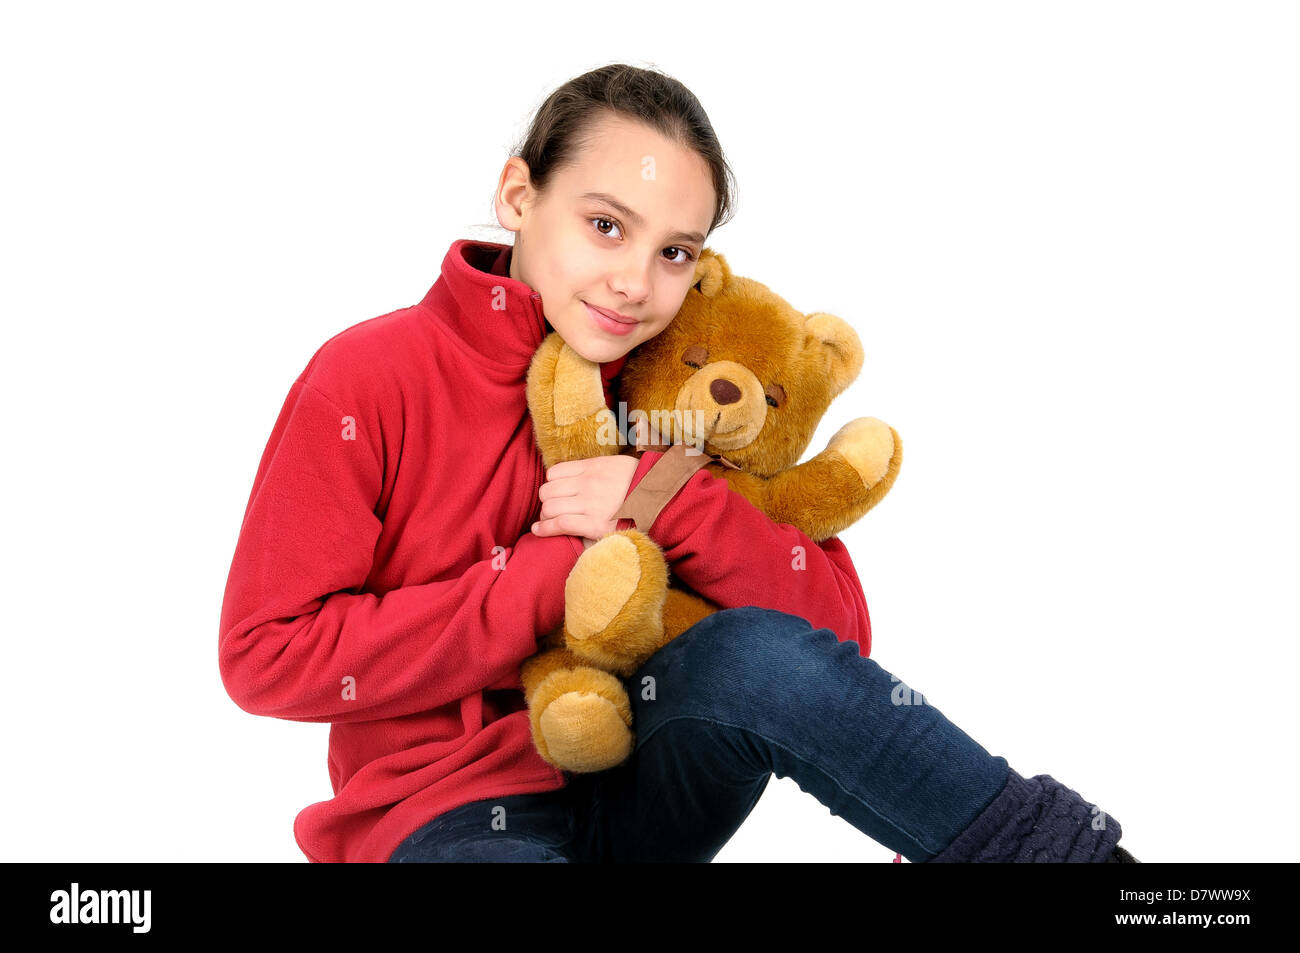 Young girl posing with teddy bear Stock Photo - Alamy